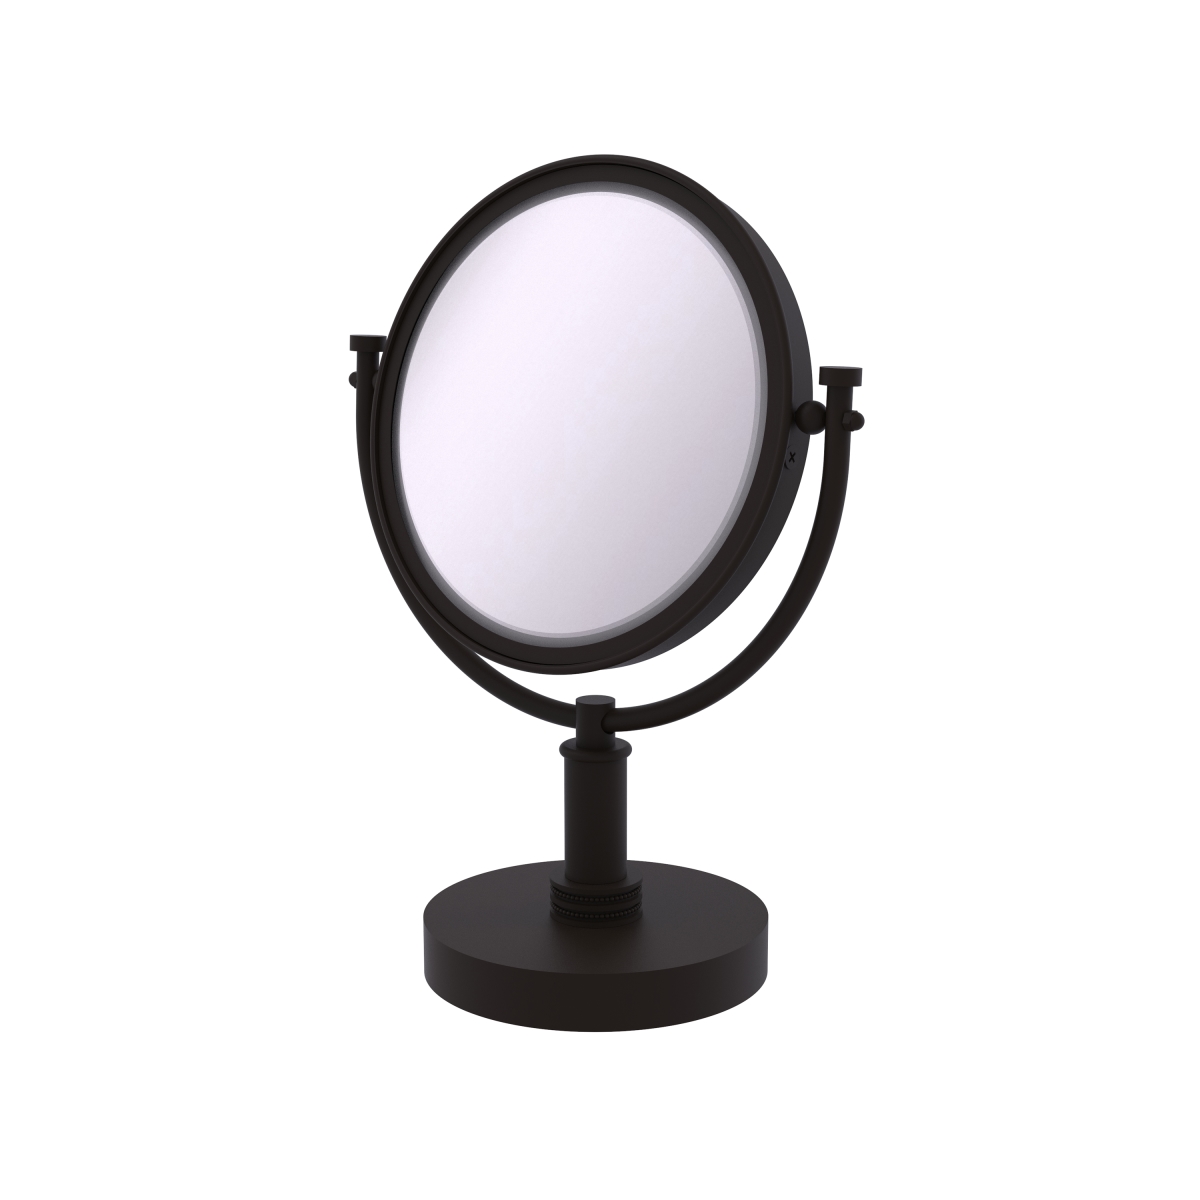 Dm-4d-4x-orb Dotted Ring Style 8 In. Vanity Top Make-up Mirror 4x Magnification, Oil Rubbed Bronze